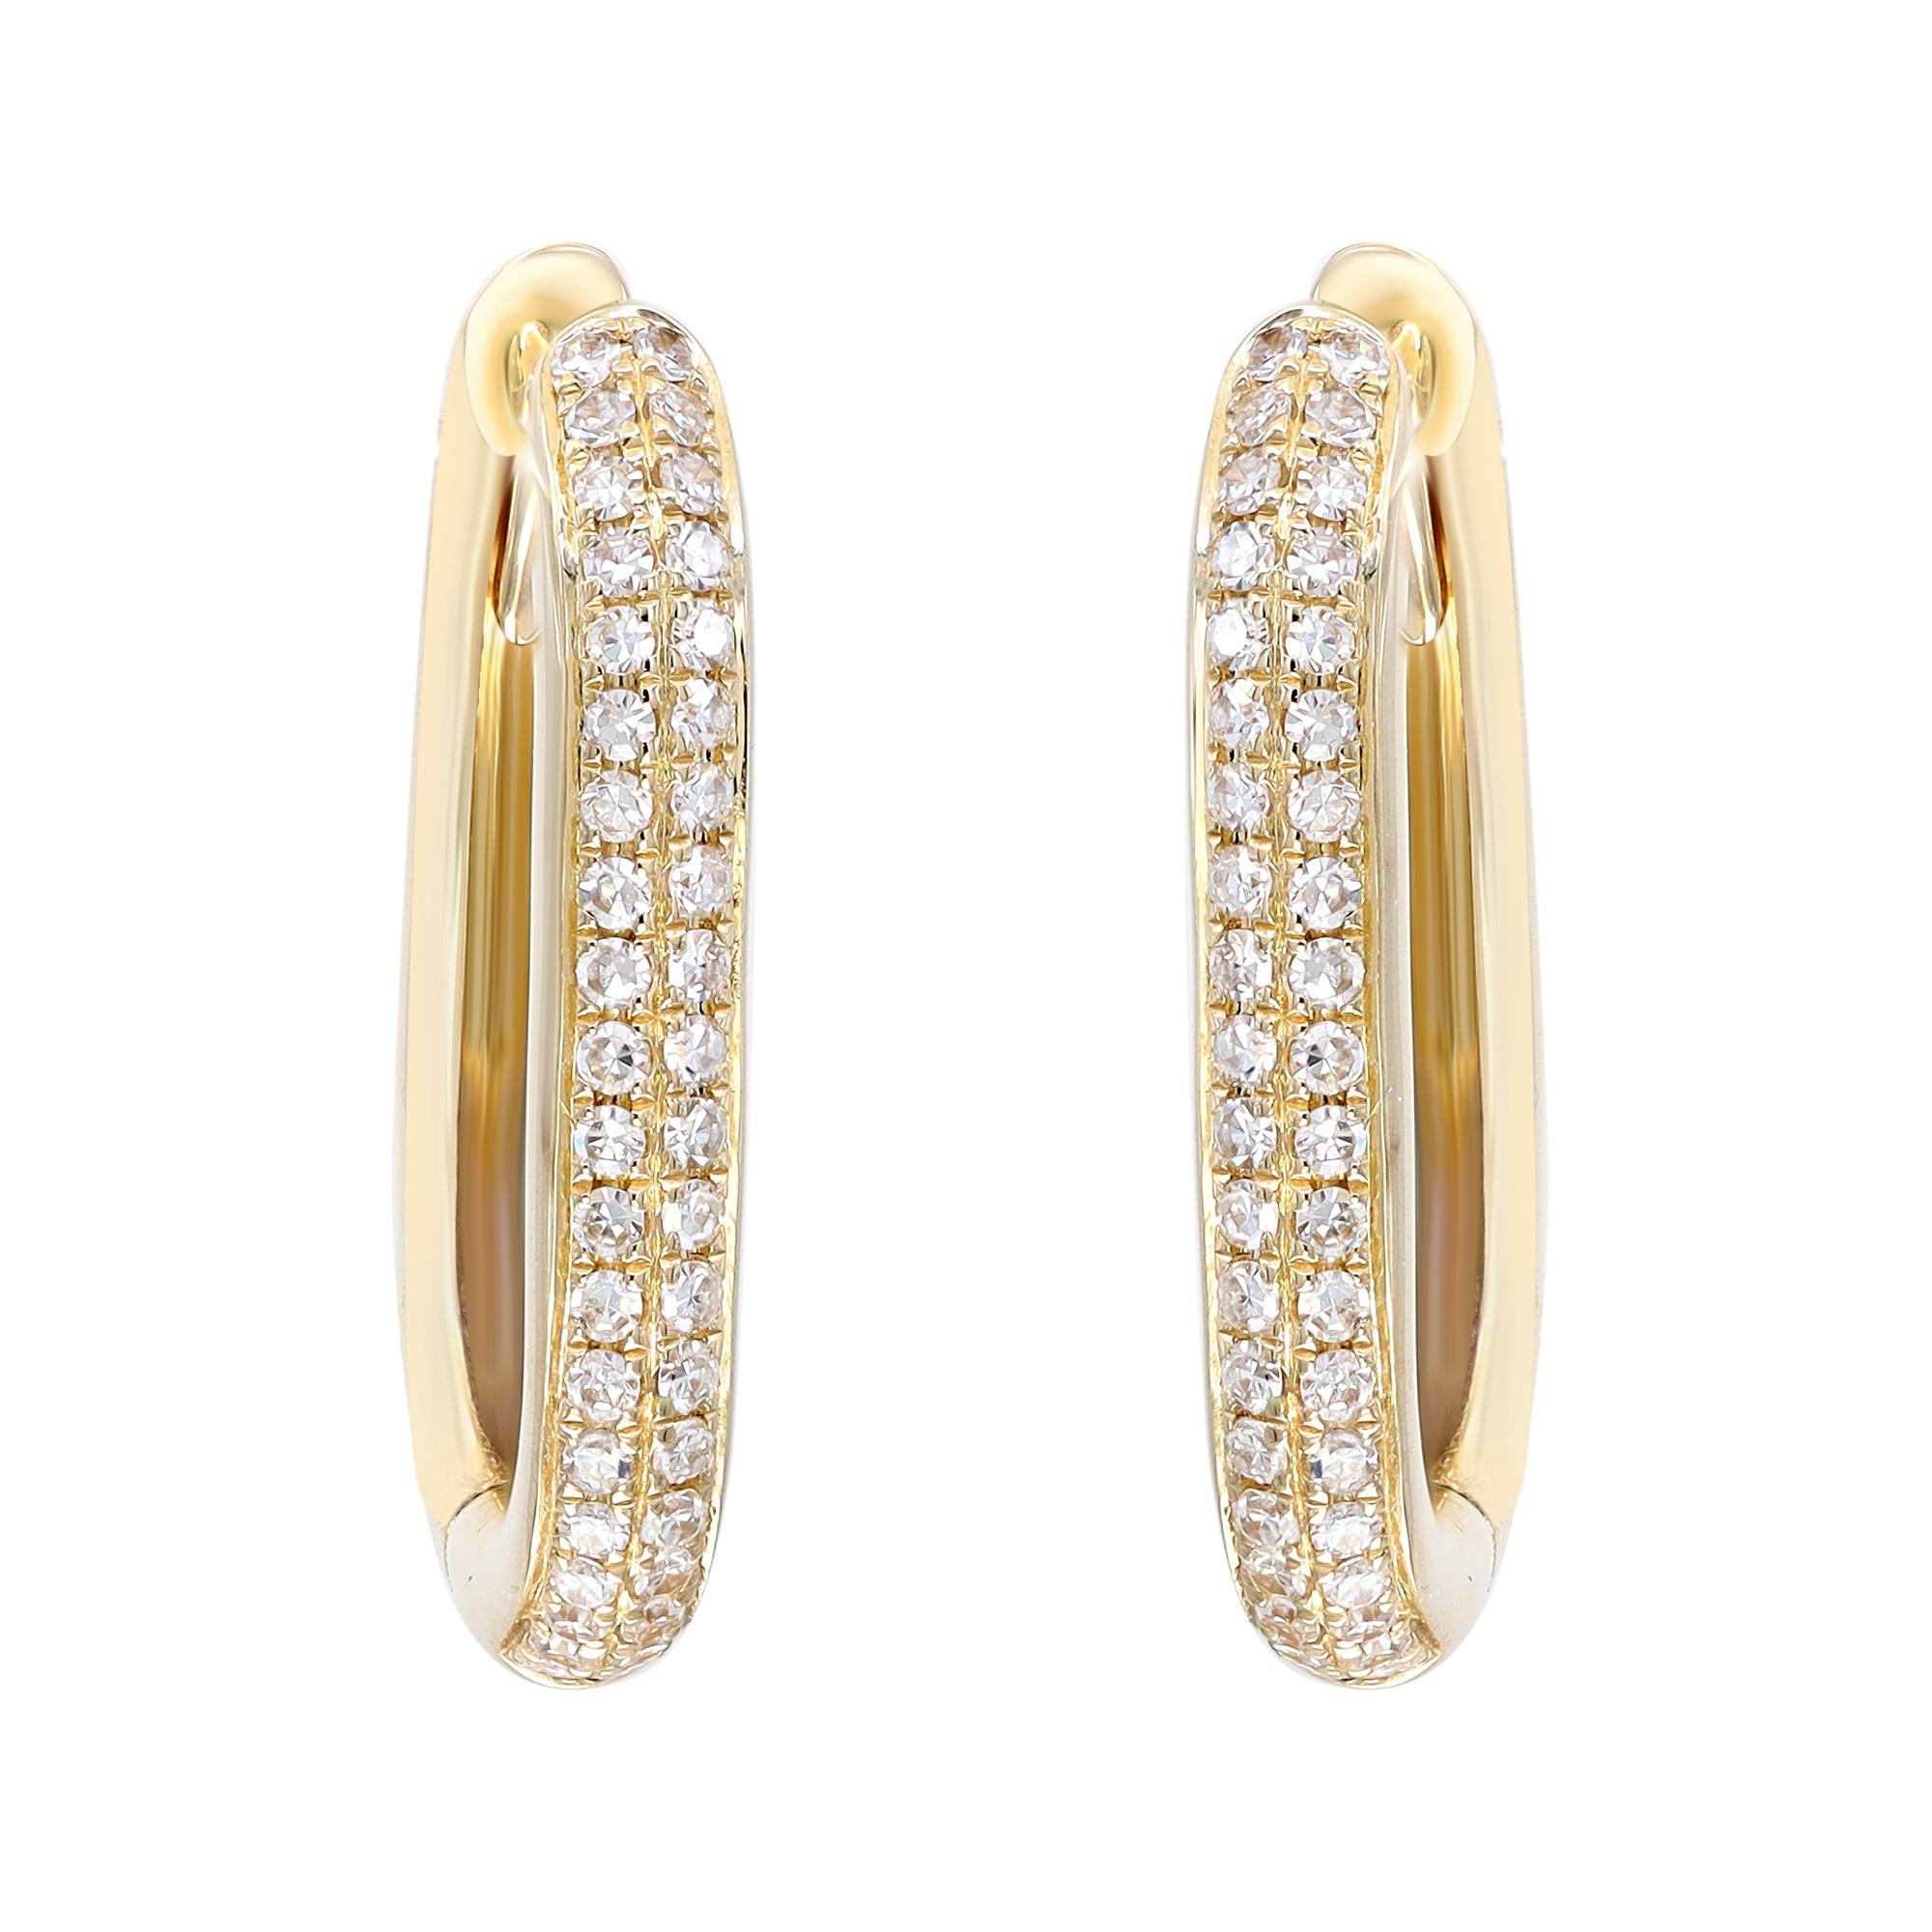 Sleek and classic, a timeless pair of diamond huggie hoop earrings, perfect for a great everyday look. These hoop earrings are crafted in 14K yellow gold and encrusted with two rows of pave set round cut diamonds weighing 0.18 carat. Diamond color